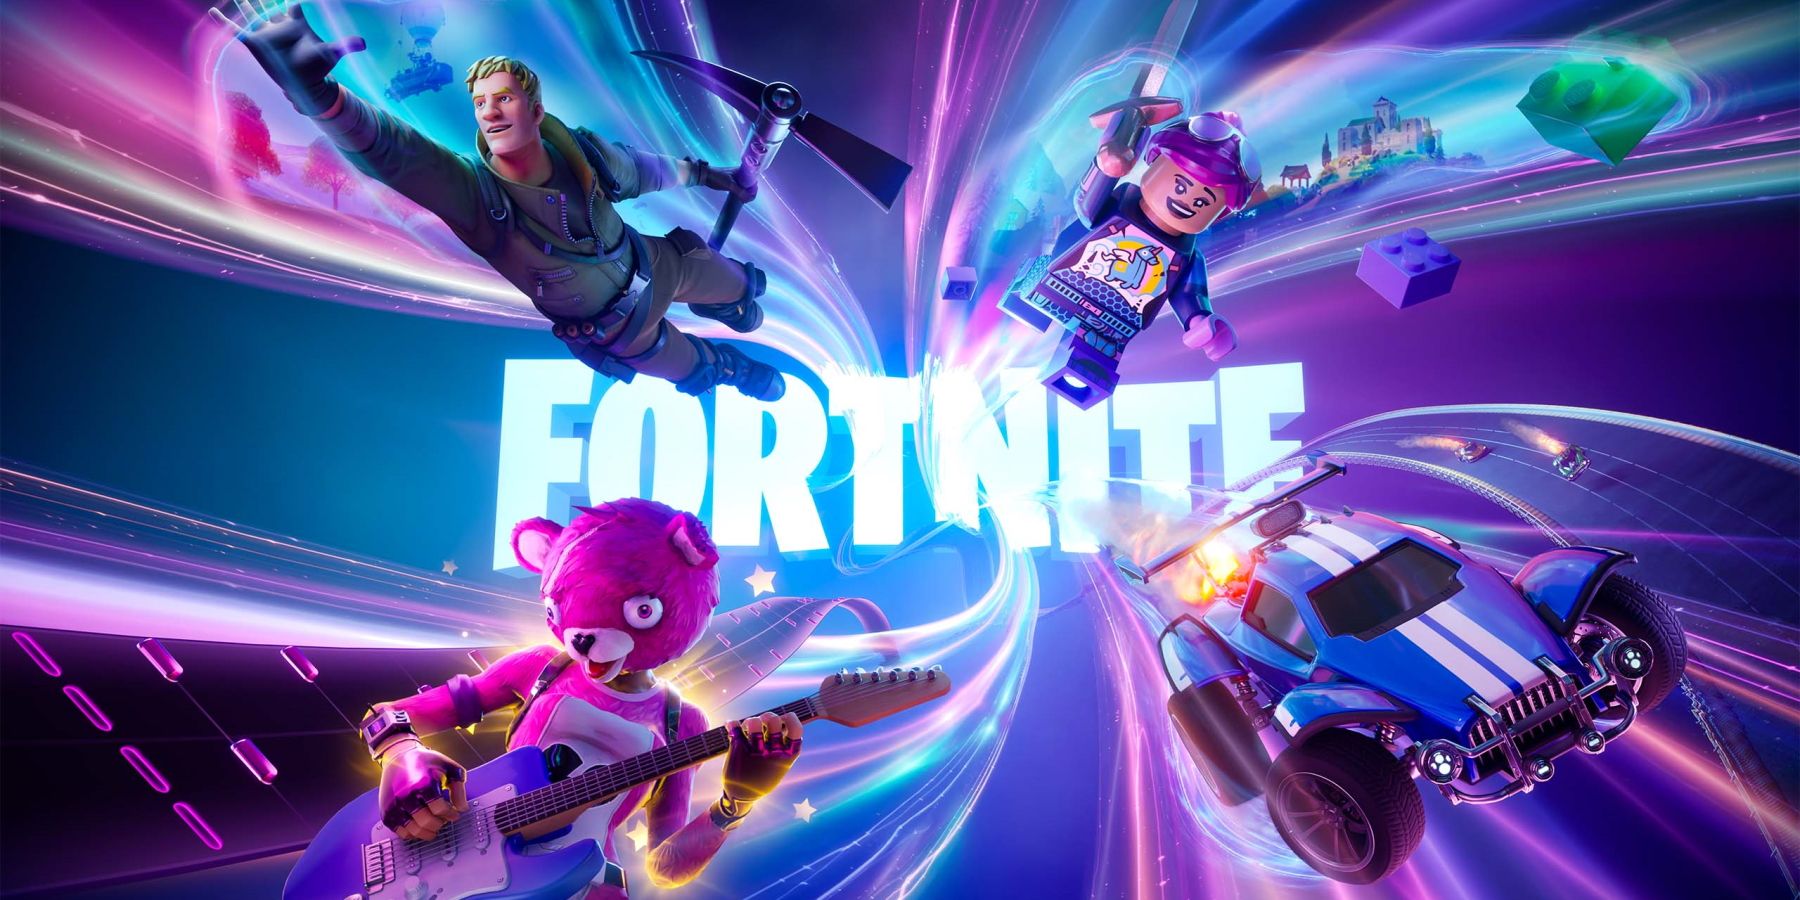 The key visual for Fortnite's Chapter 5. The image depicts several Fortnite characters showing off the new game modes including LEGO Fortnite, Rocket Racing, and Fortnite Festival.